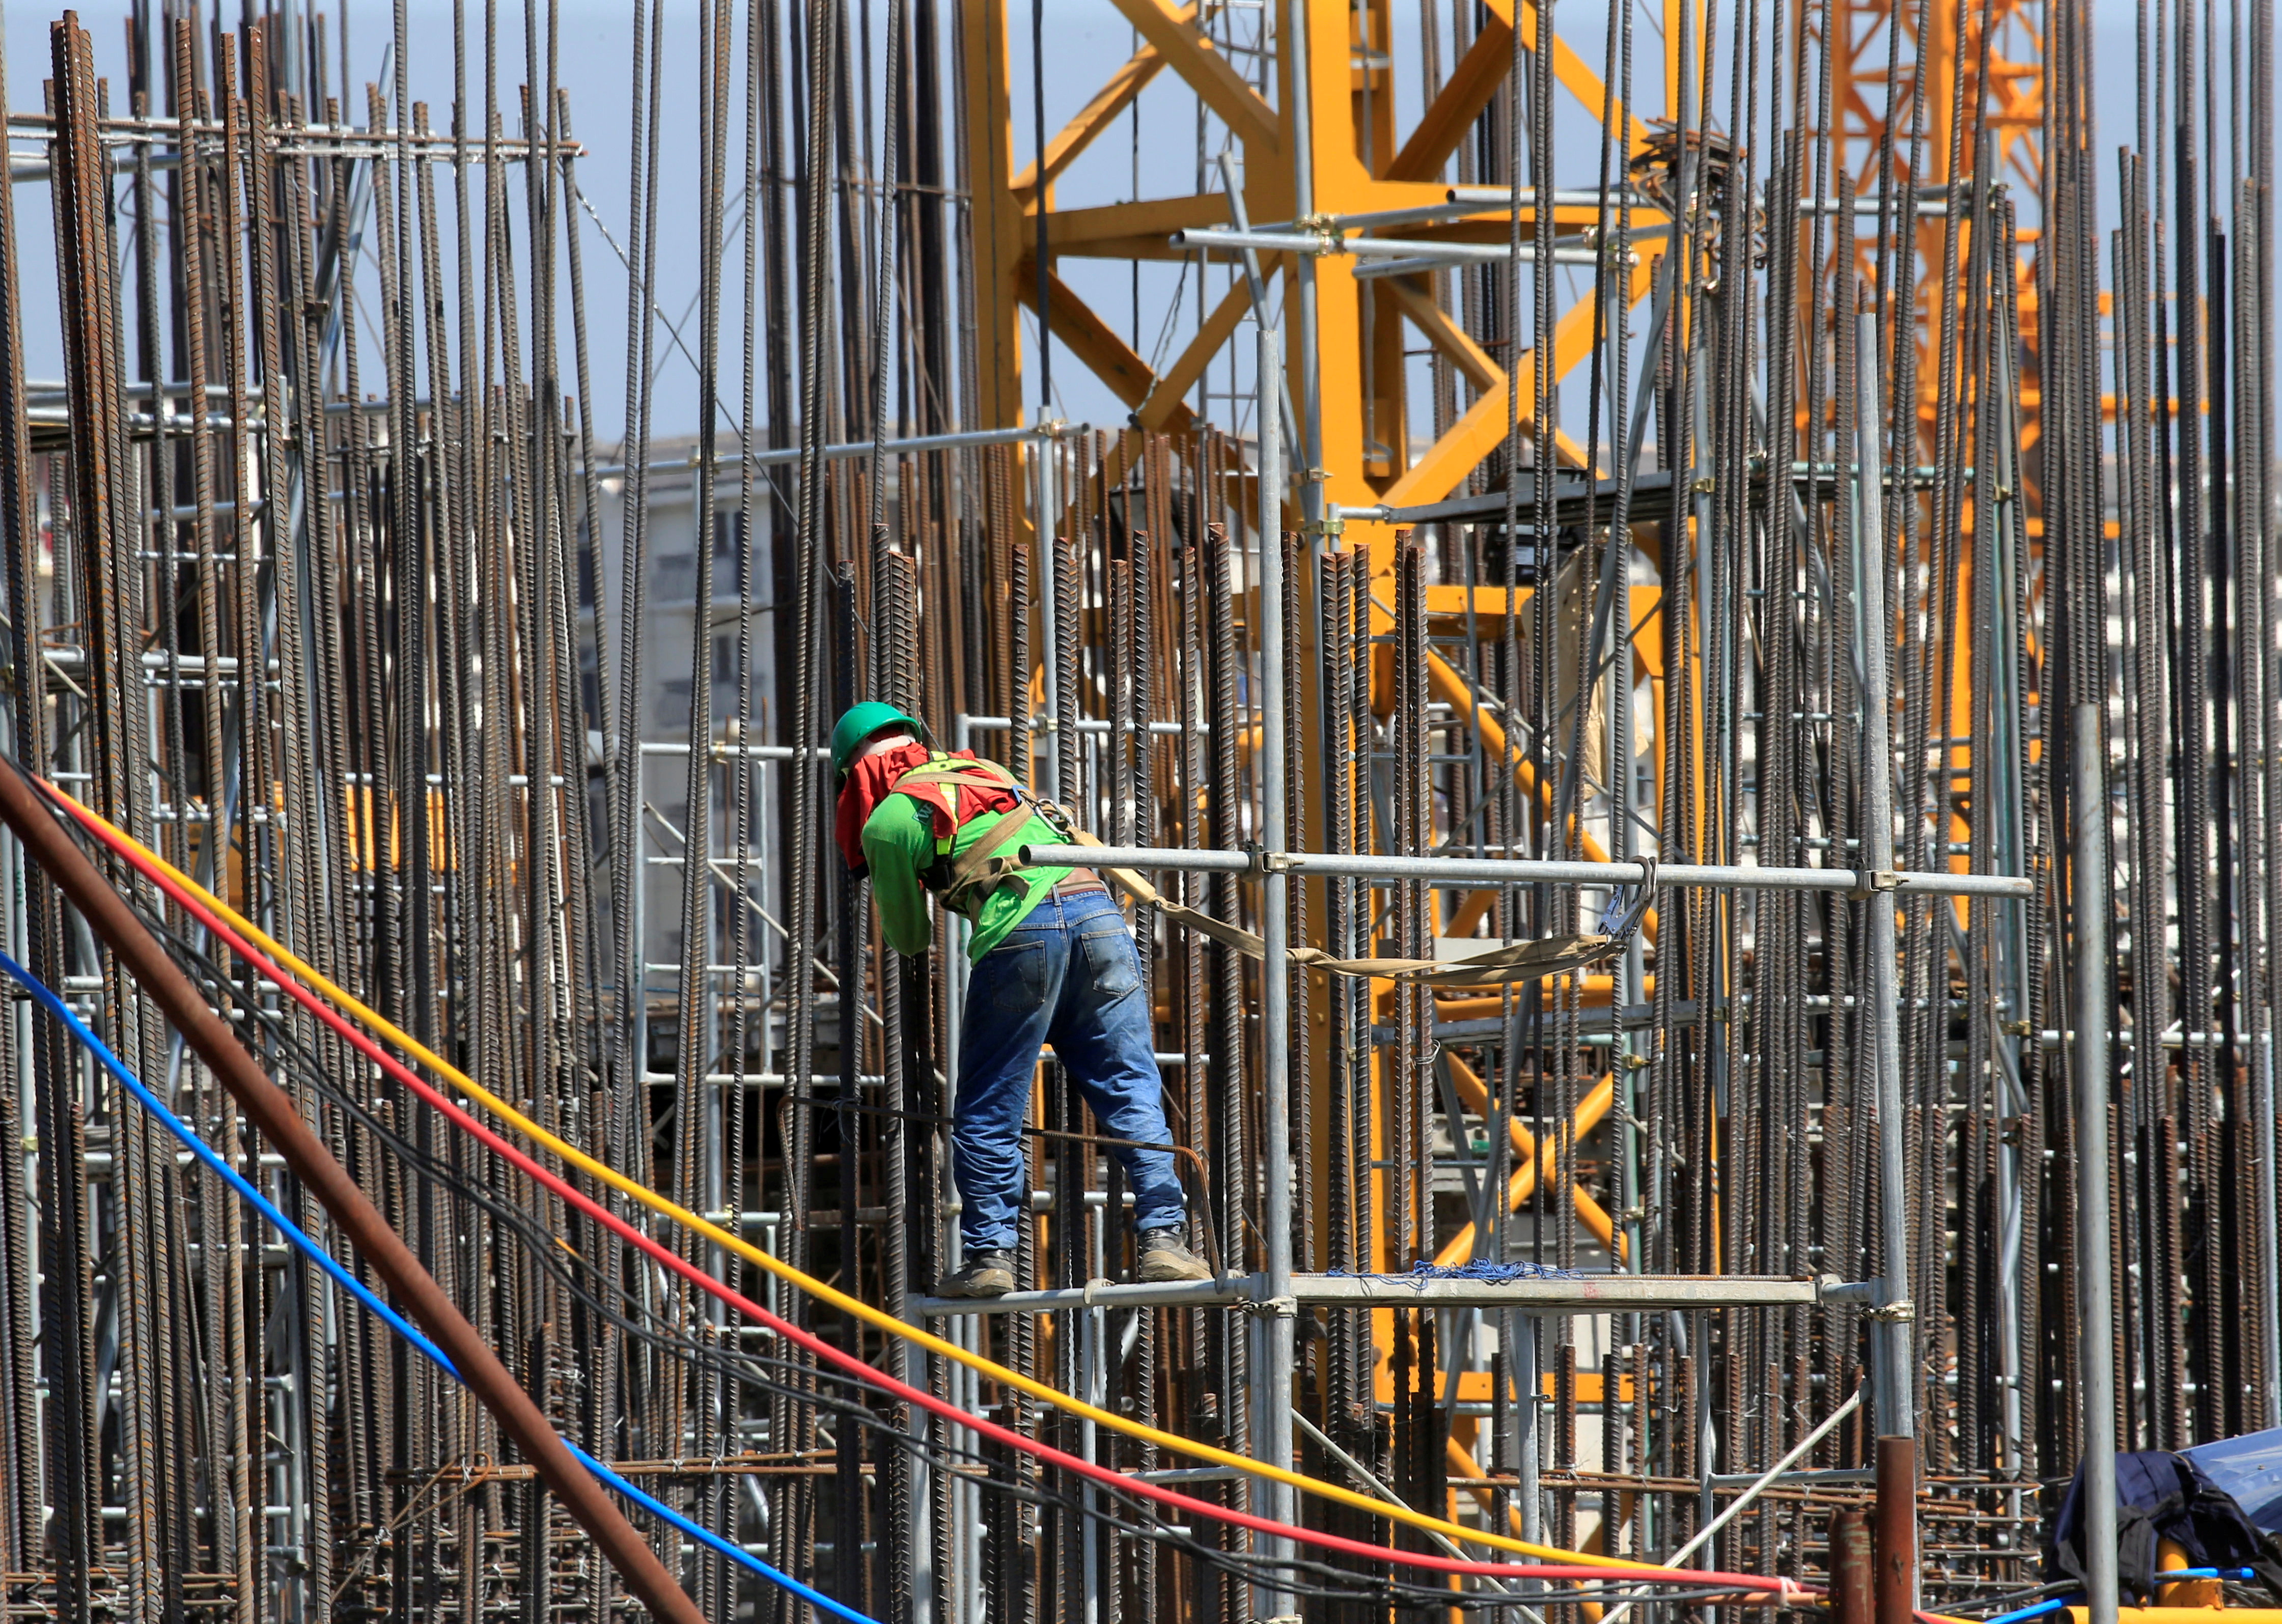 A worker installs steel rods at a construction site in Paranaque city, metro Manila